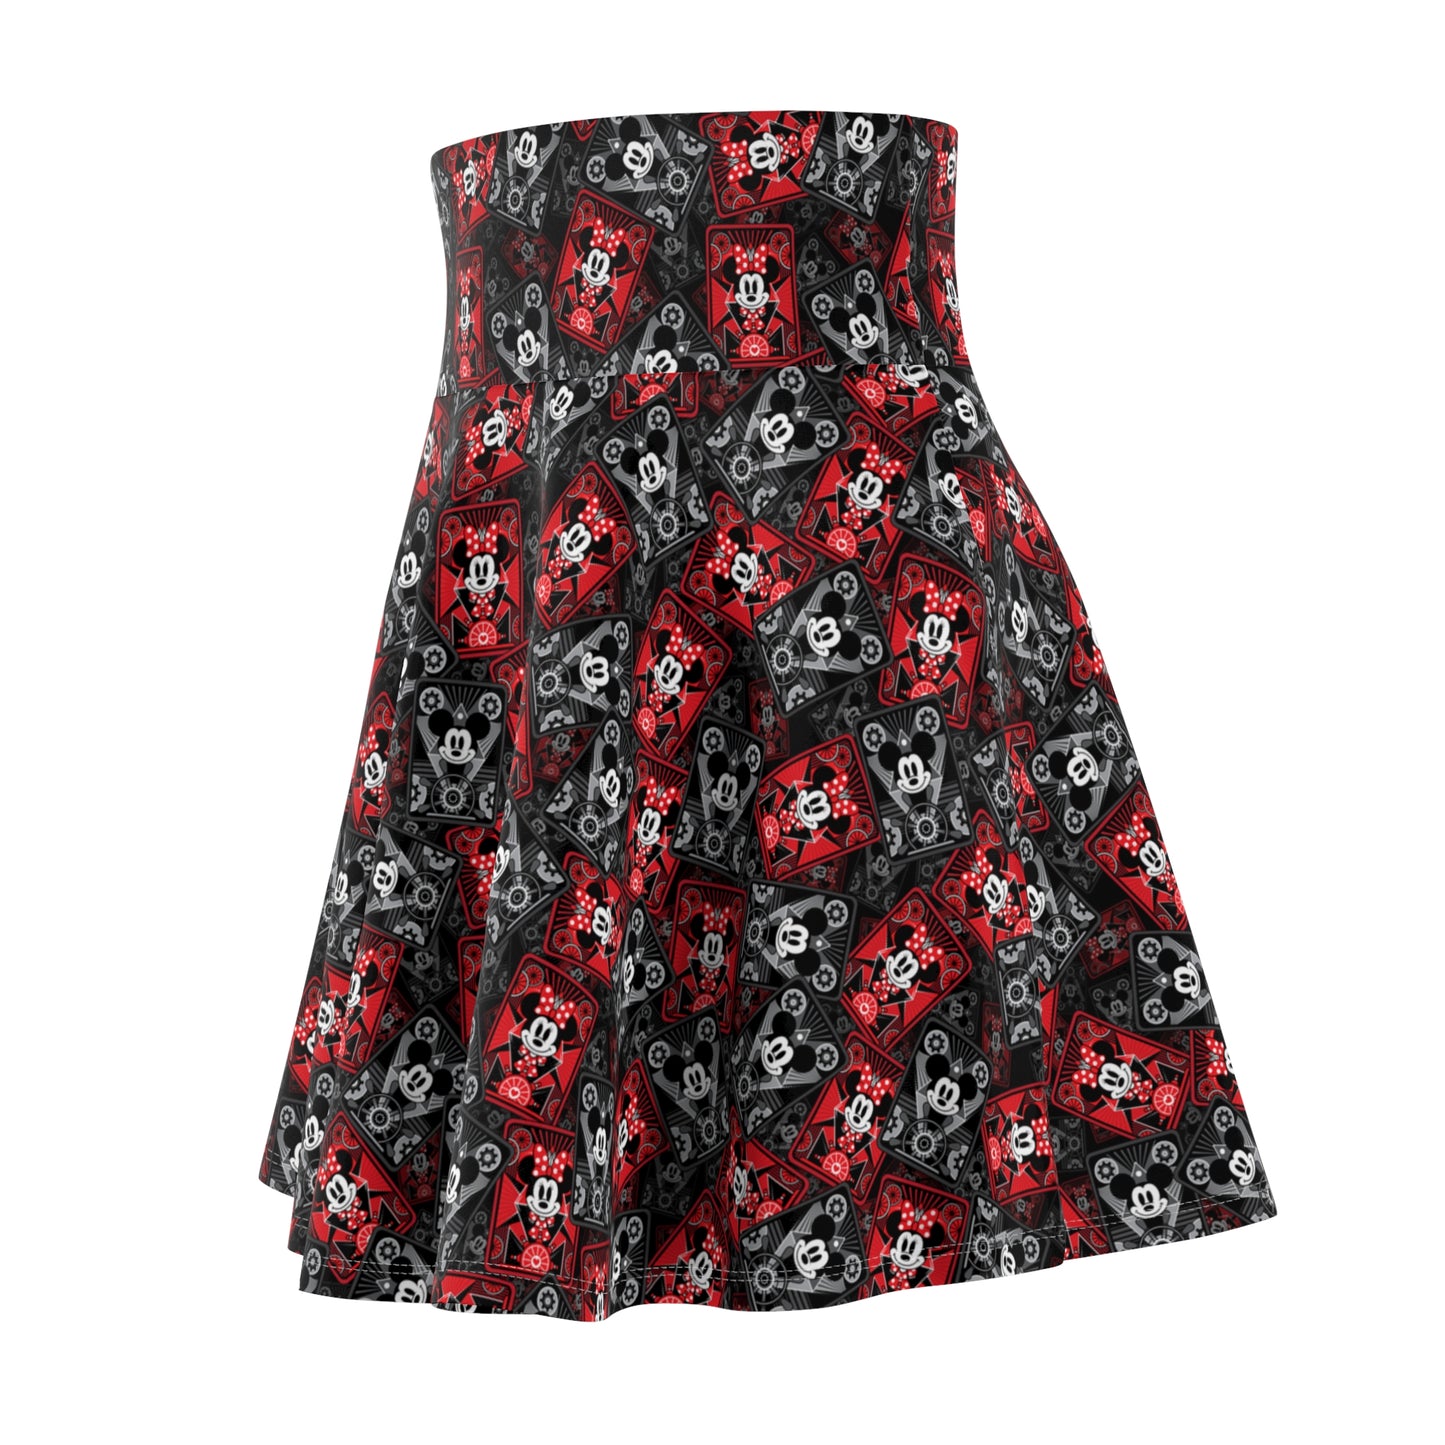 Steamboat Mickey And Minnie Cards Women's Skater Skirt